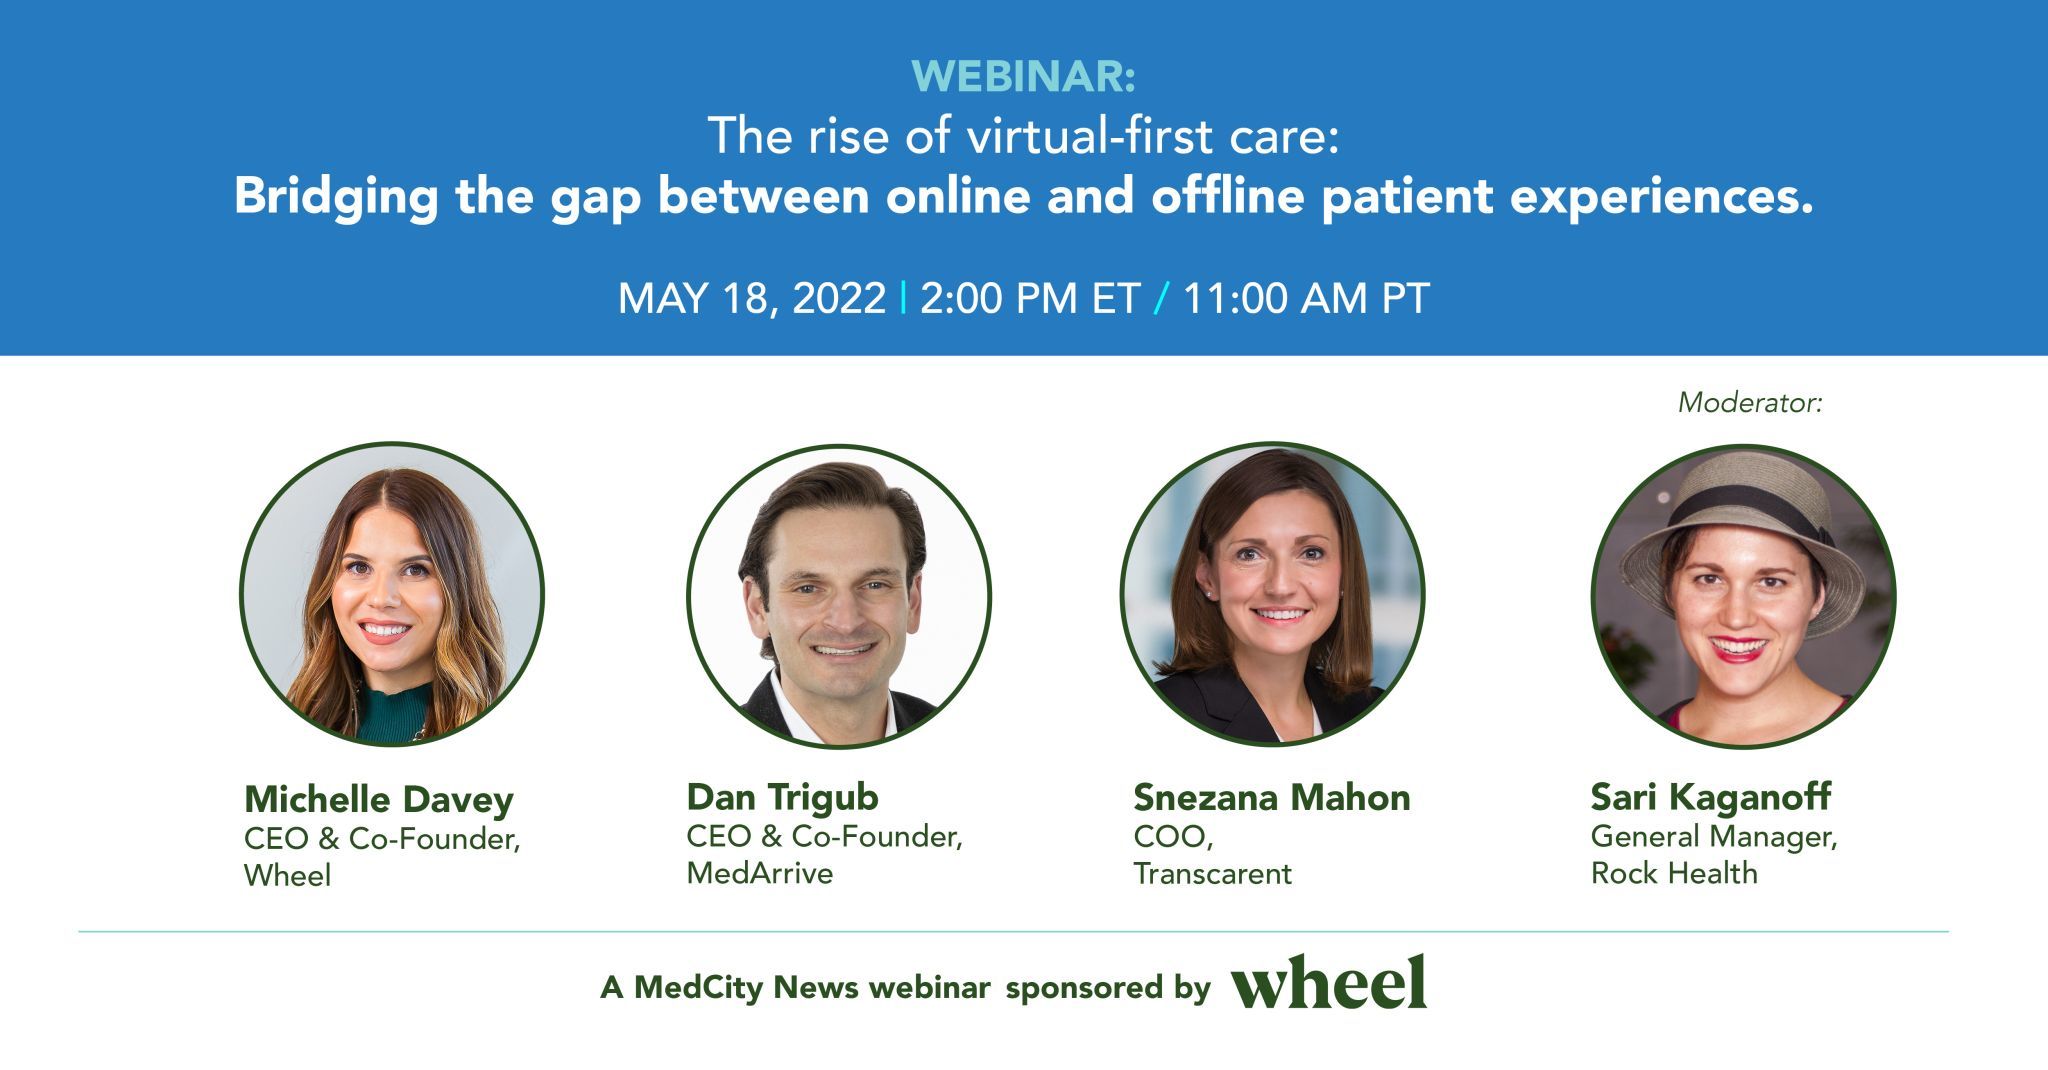 Webinar: The rise of virtual-first care: Bridging the gap between online and offline patient experiences.